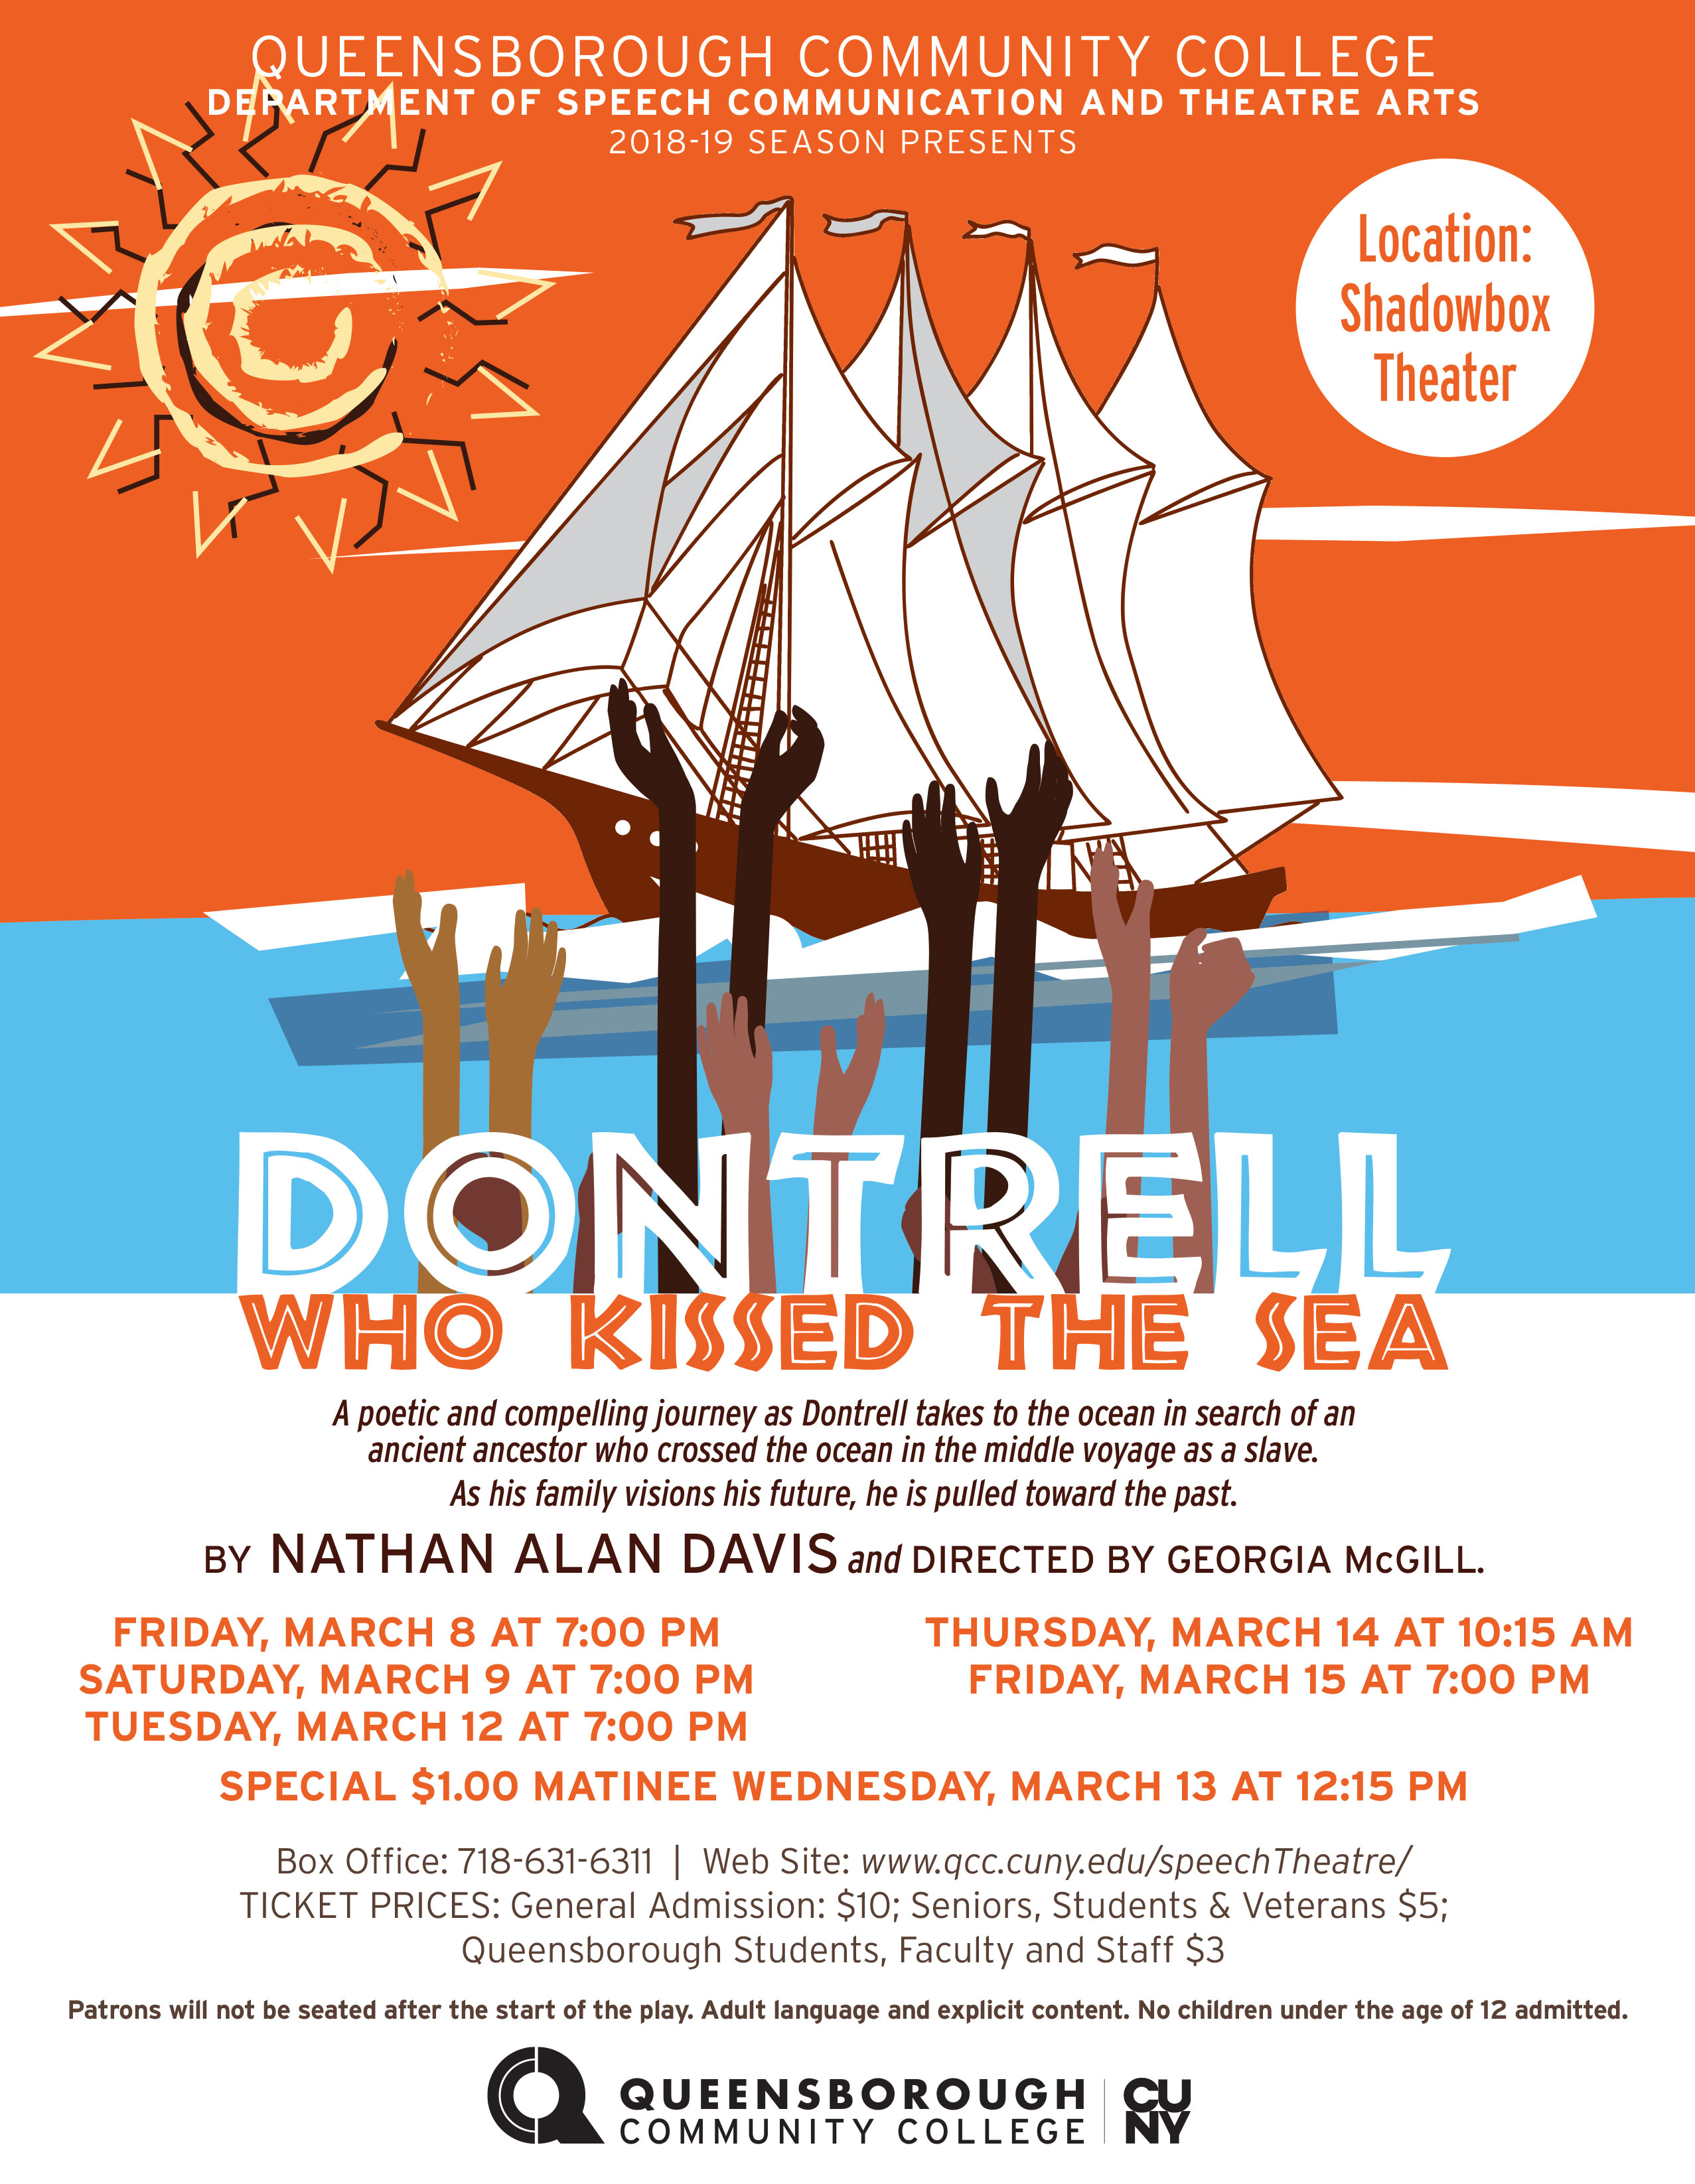 This is a poster for the spring 2019 production of ‘Dontrell, Who Kissed The Sea’ by Nathan Alan Davis, and Directed by Professor McGill. The poster displays a sailboat at sea with a diverse grouping of hands reaching up towards the sky.